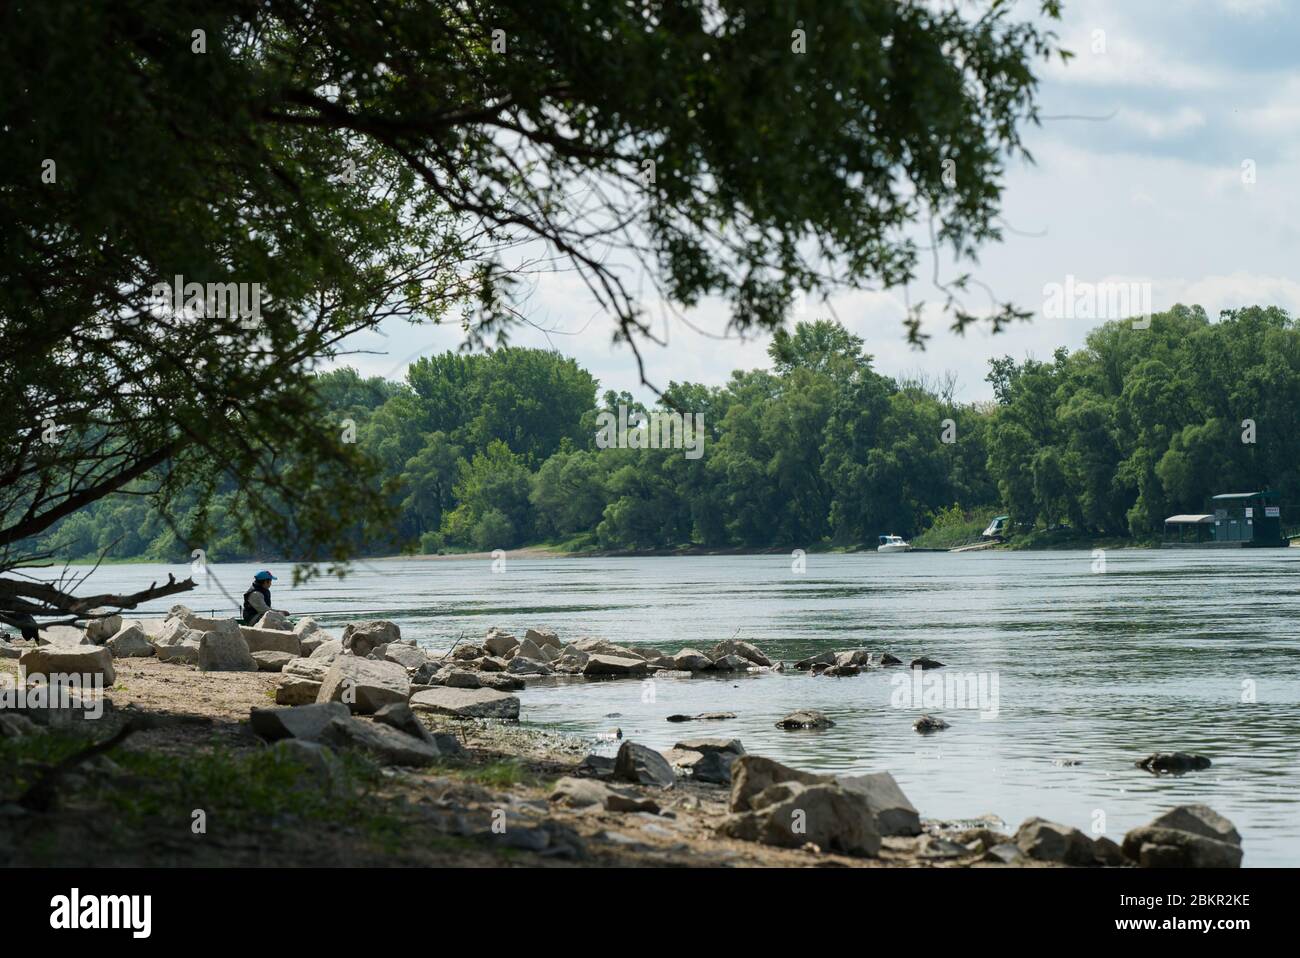 Angler fishing at the untouched bank of the Danube in Hungary, Europe. Green trees, blue sky in summer. Stock Photo